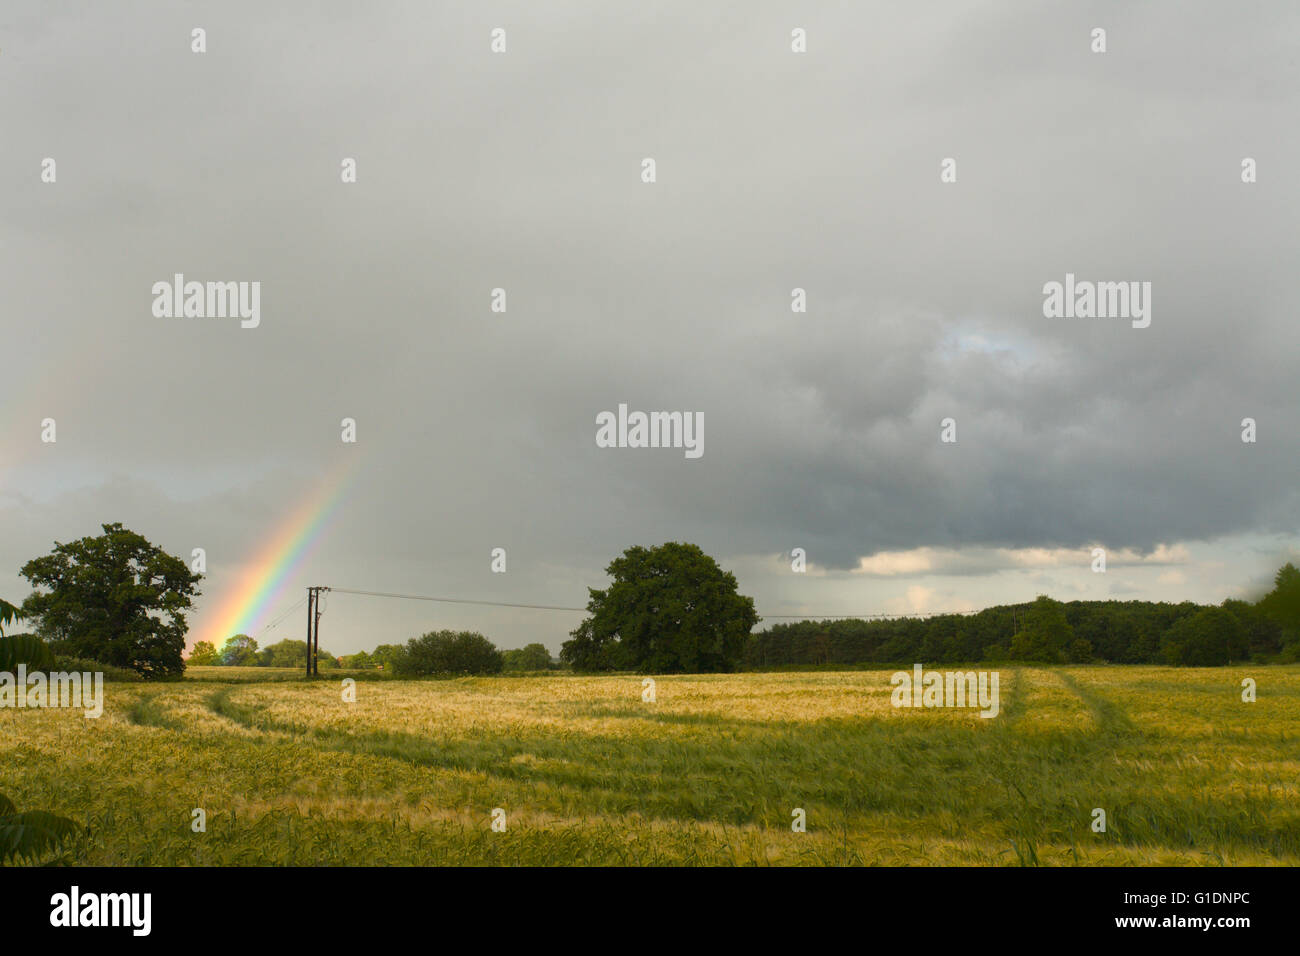 A rainbow forms over a barley field in Ampthill, Bedfordshire Stock Photo